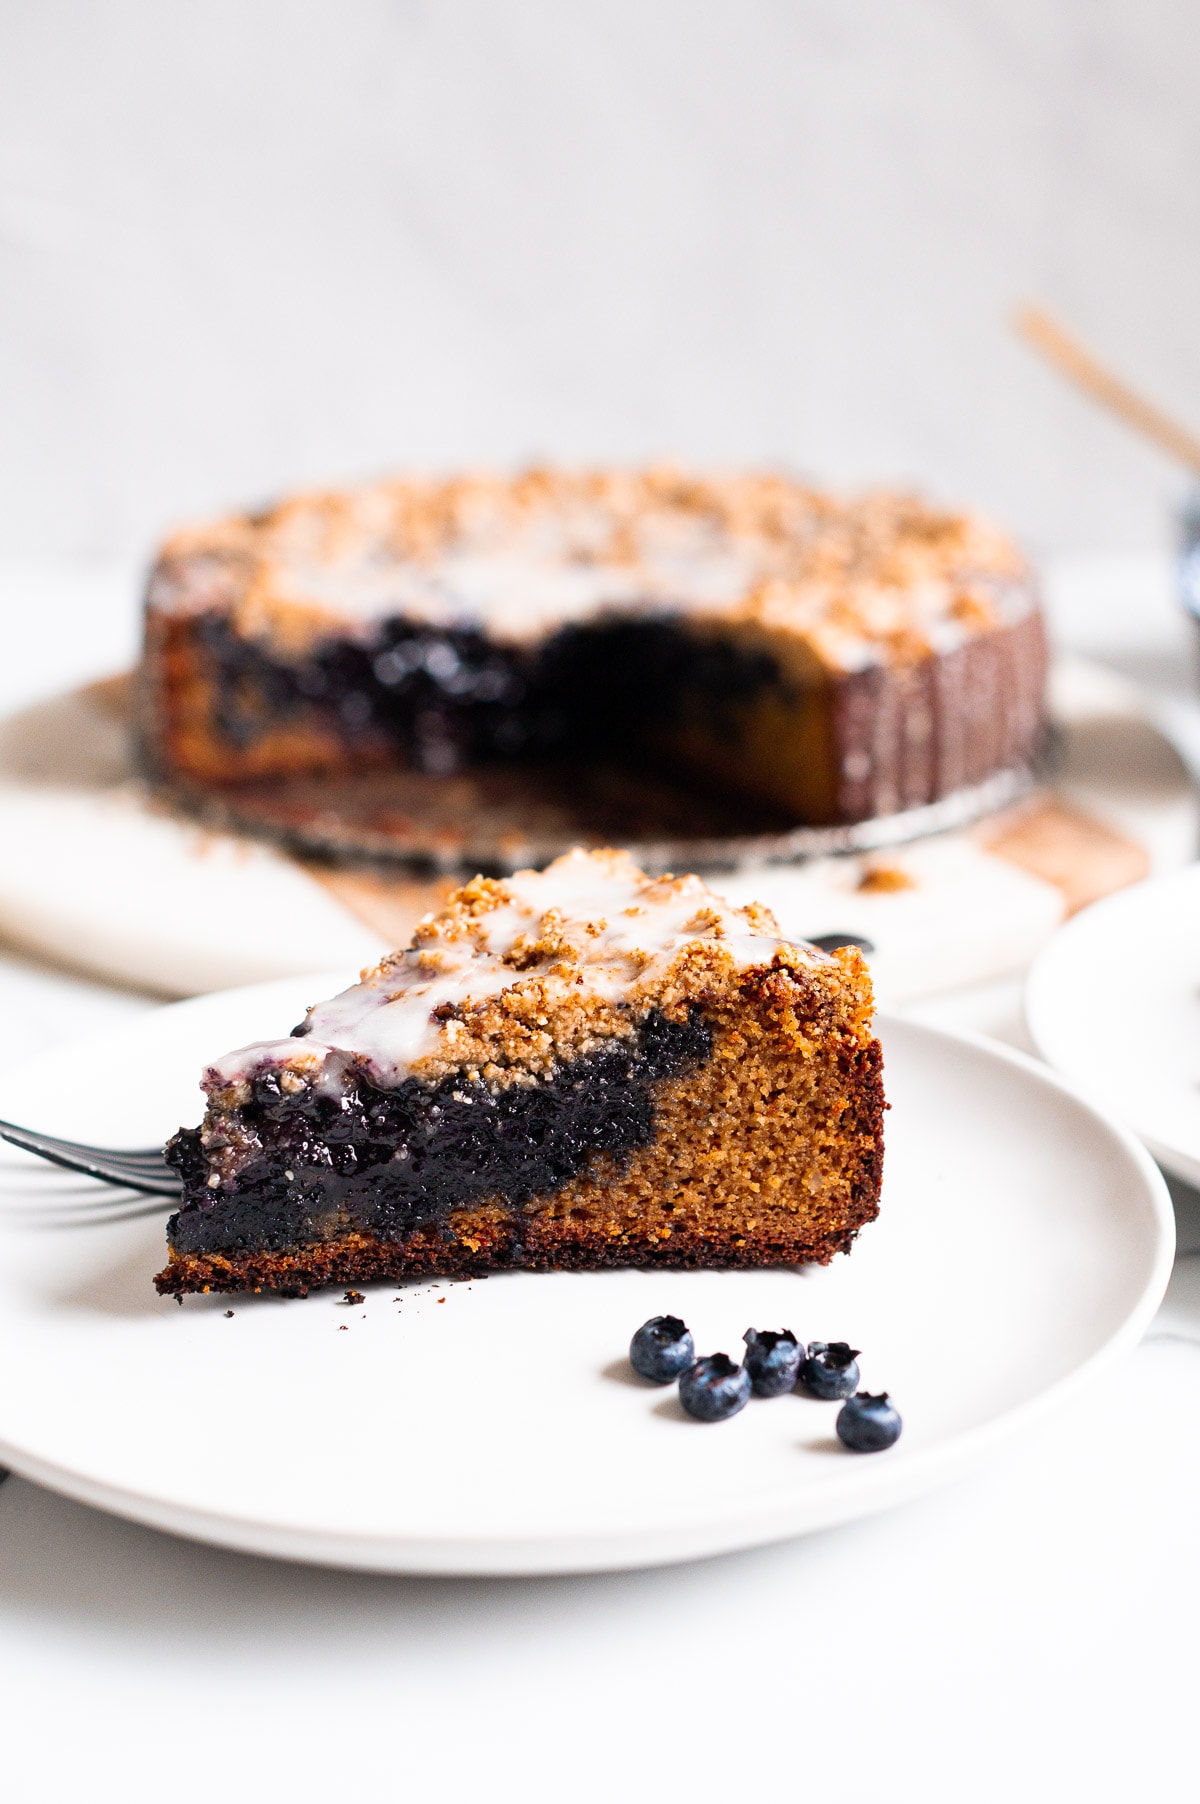 A slice of blueberry crumb cake with a glaze on a plate with blueberries and a fork. Cake in the background.